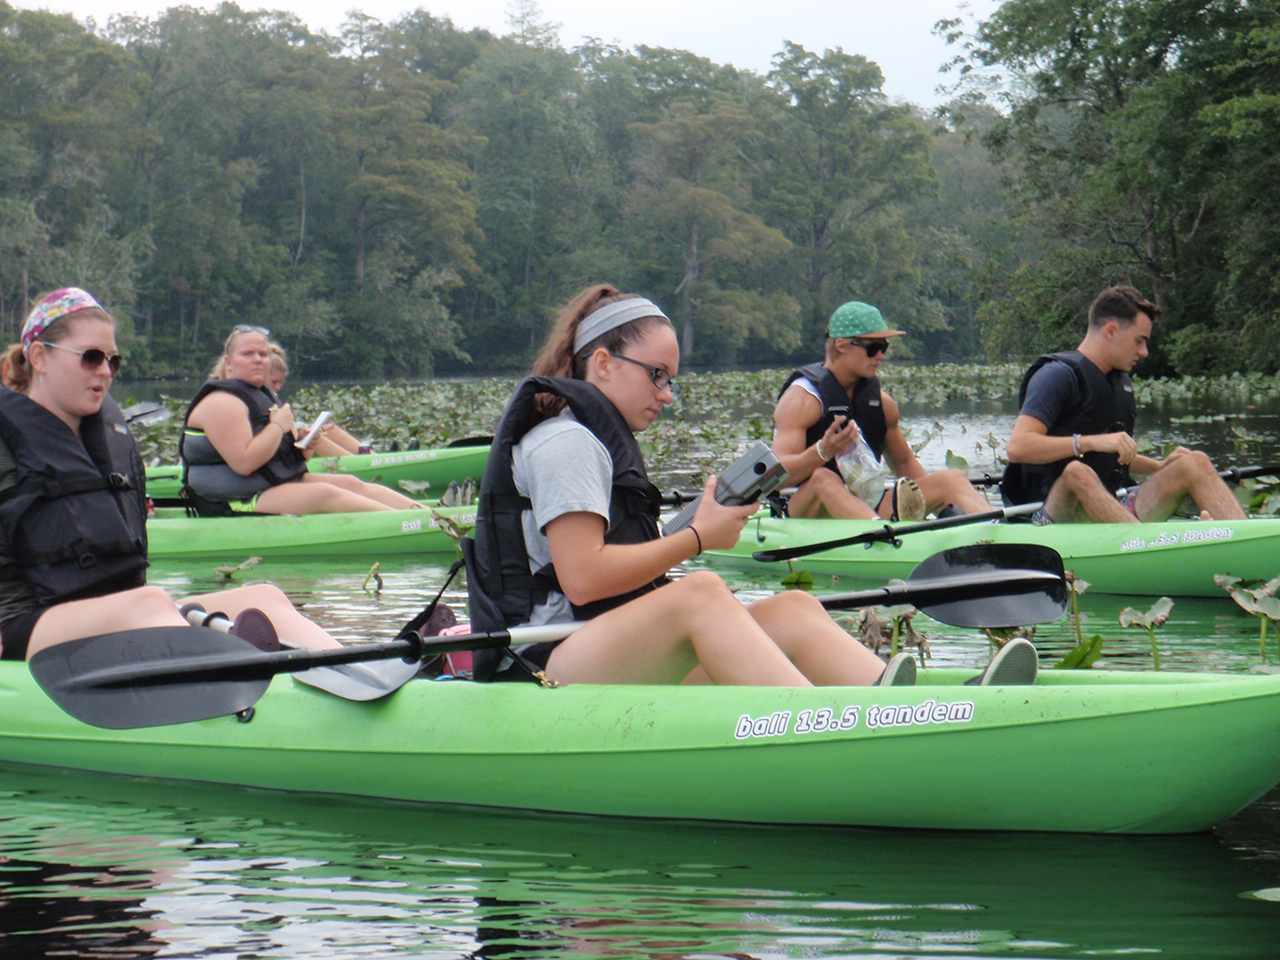 Students on kayaks with equipment